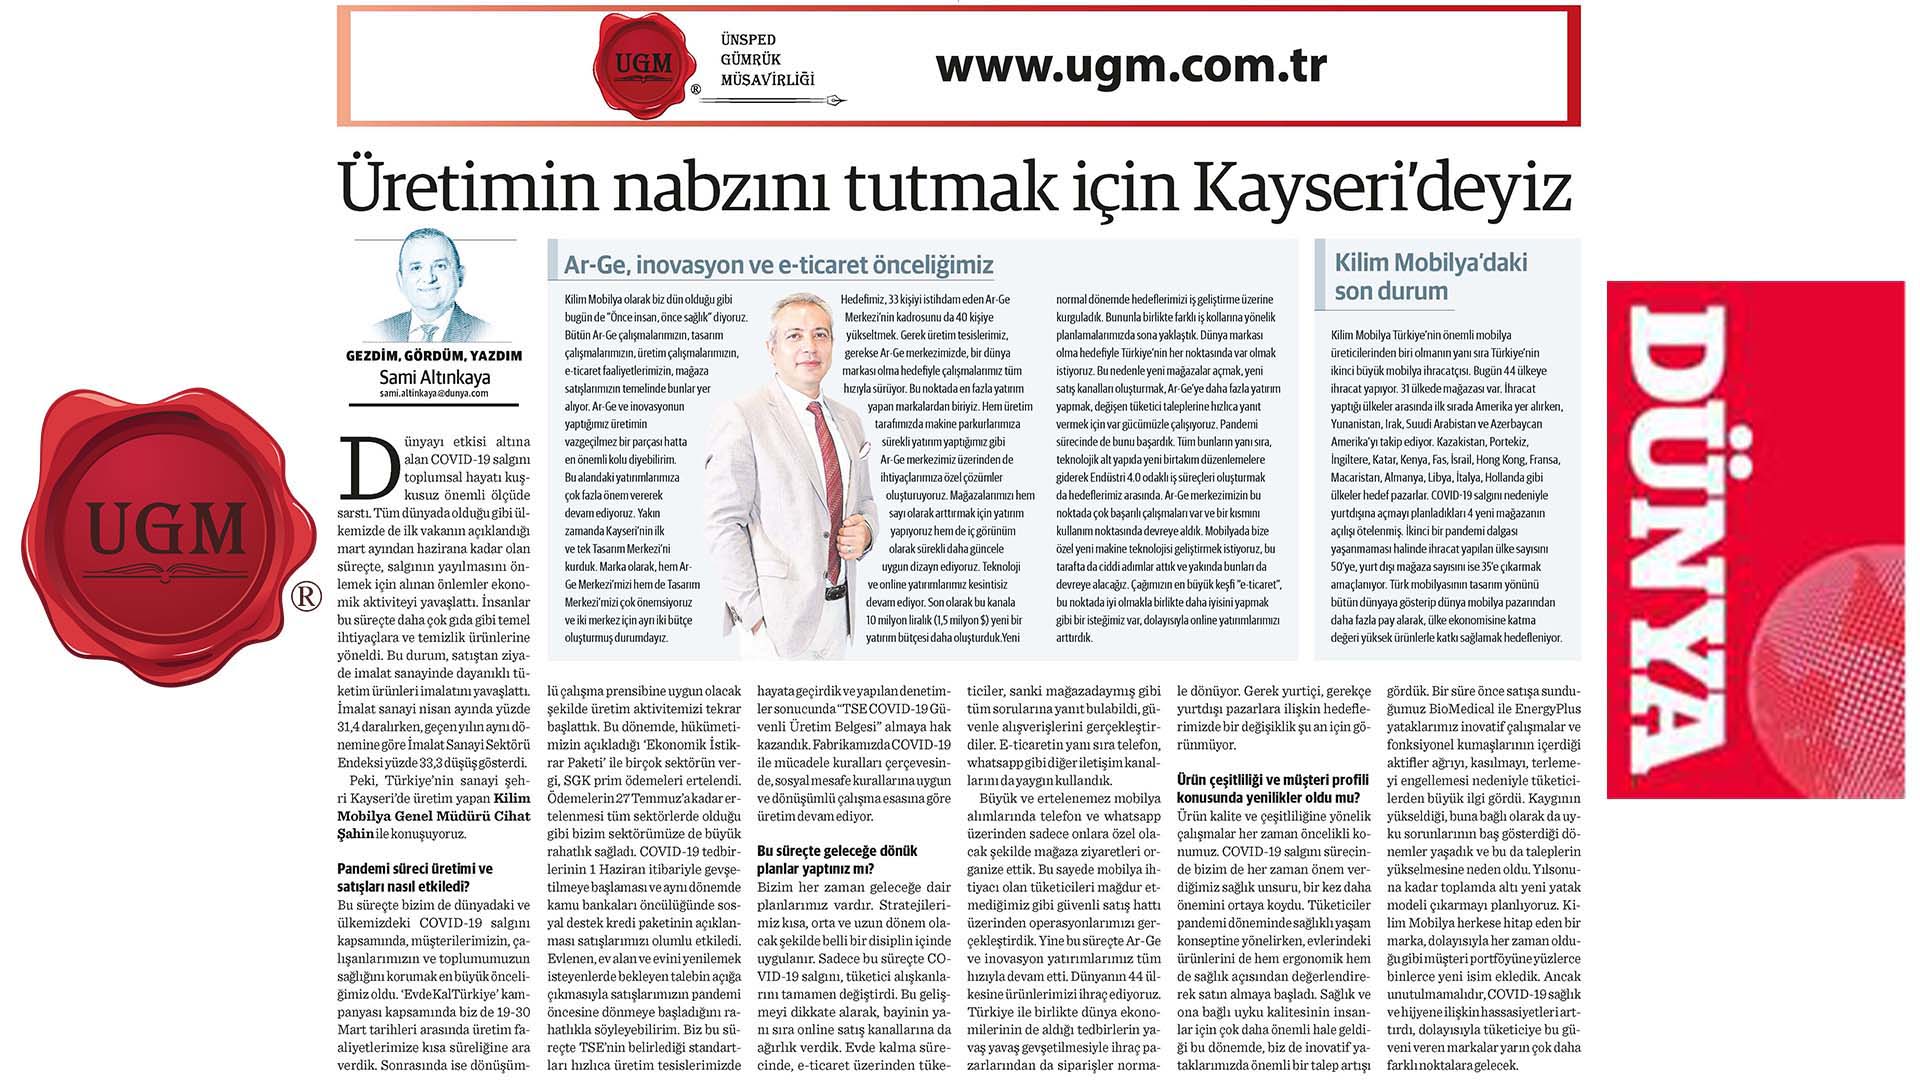 Our UGM Corporate Communications Director Sami Altınkaya's article entitled" We are in Kayseri to keep the pulse of production" was published in the Dünya newspaper on 10.08.2020.